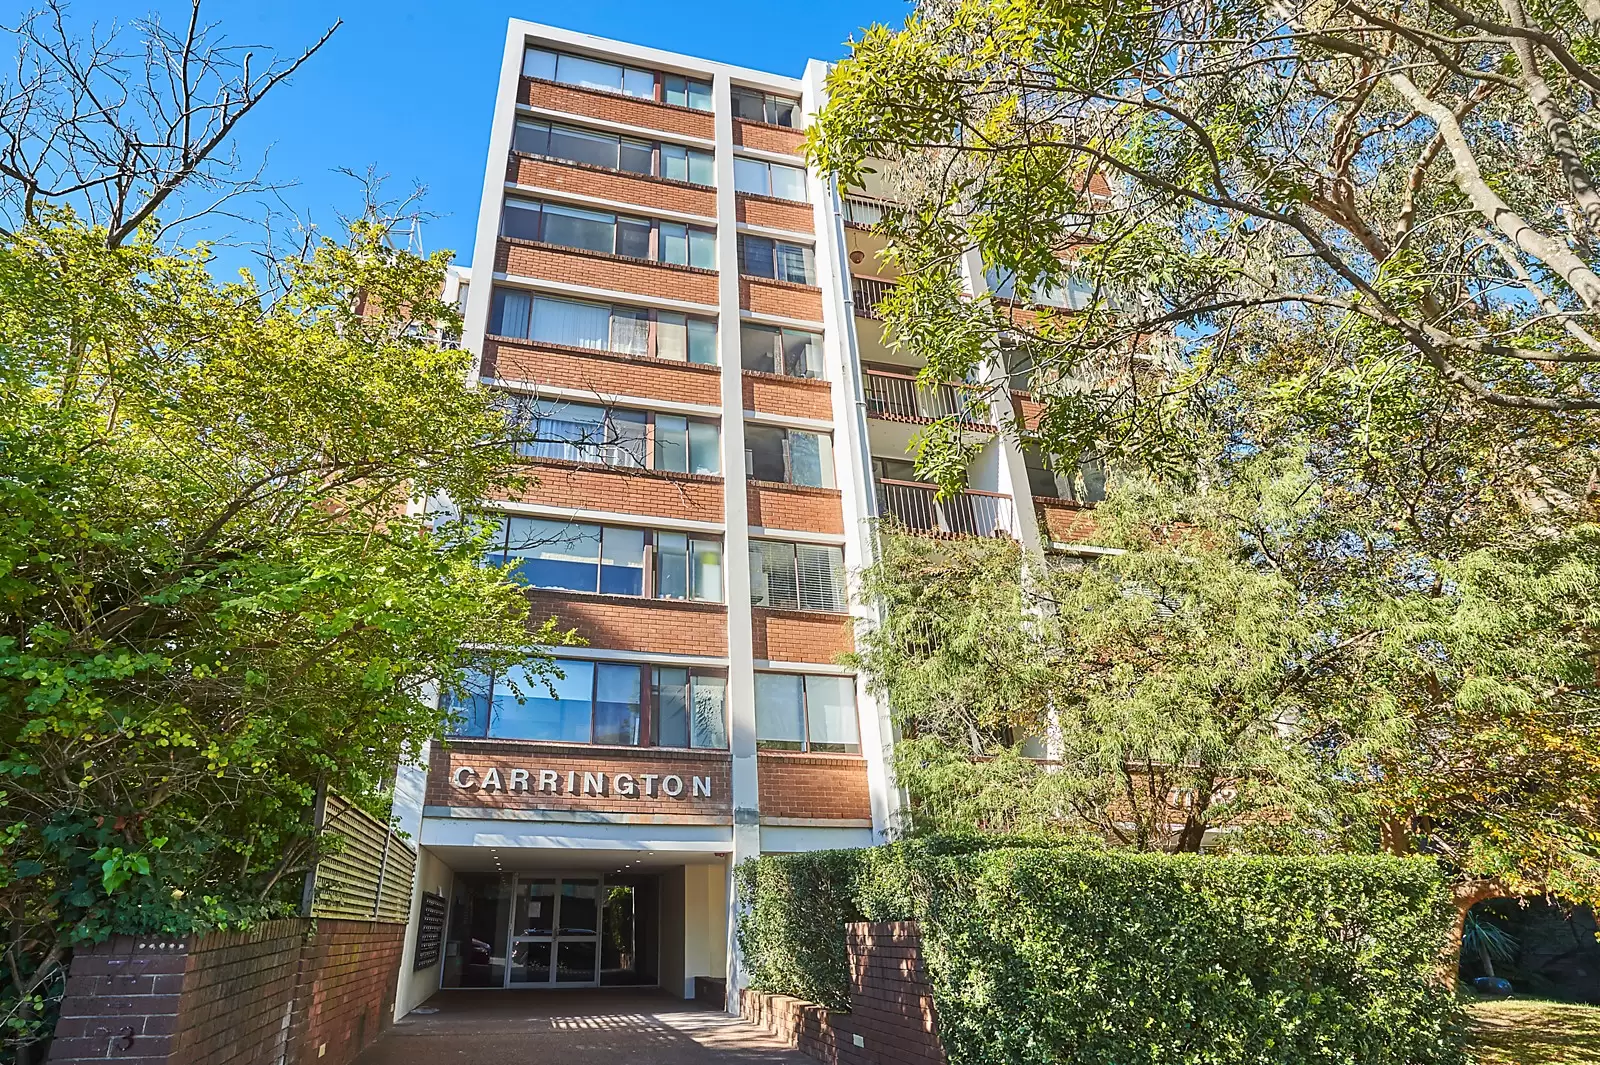 Photo #6: 8/77-83 Cook Road, Centennial Park - Sold by Sydney Sotheby's International Realty